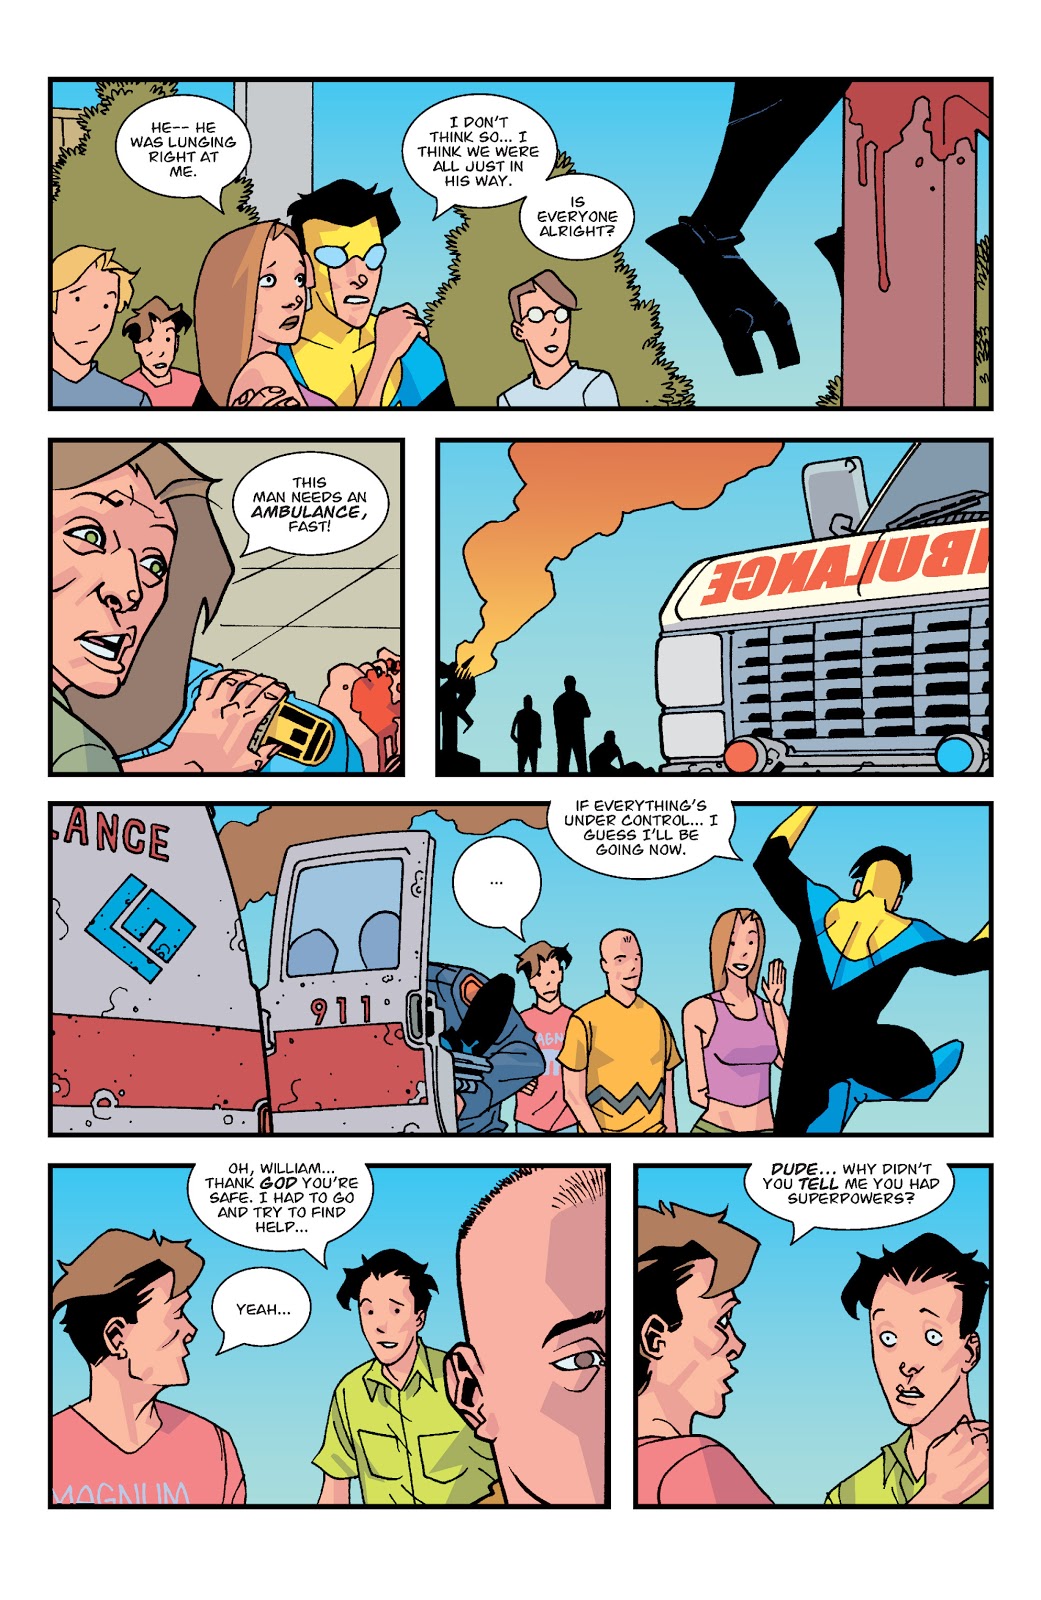 Invincible: Vol. 2 - Invincible takes control of the situation at the college visit.